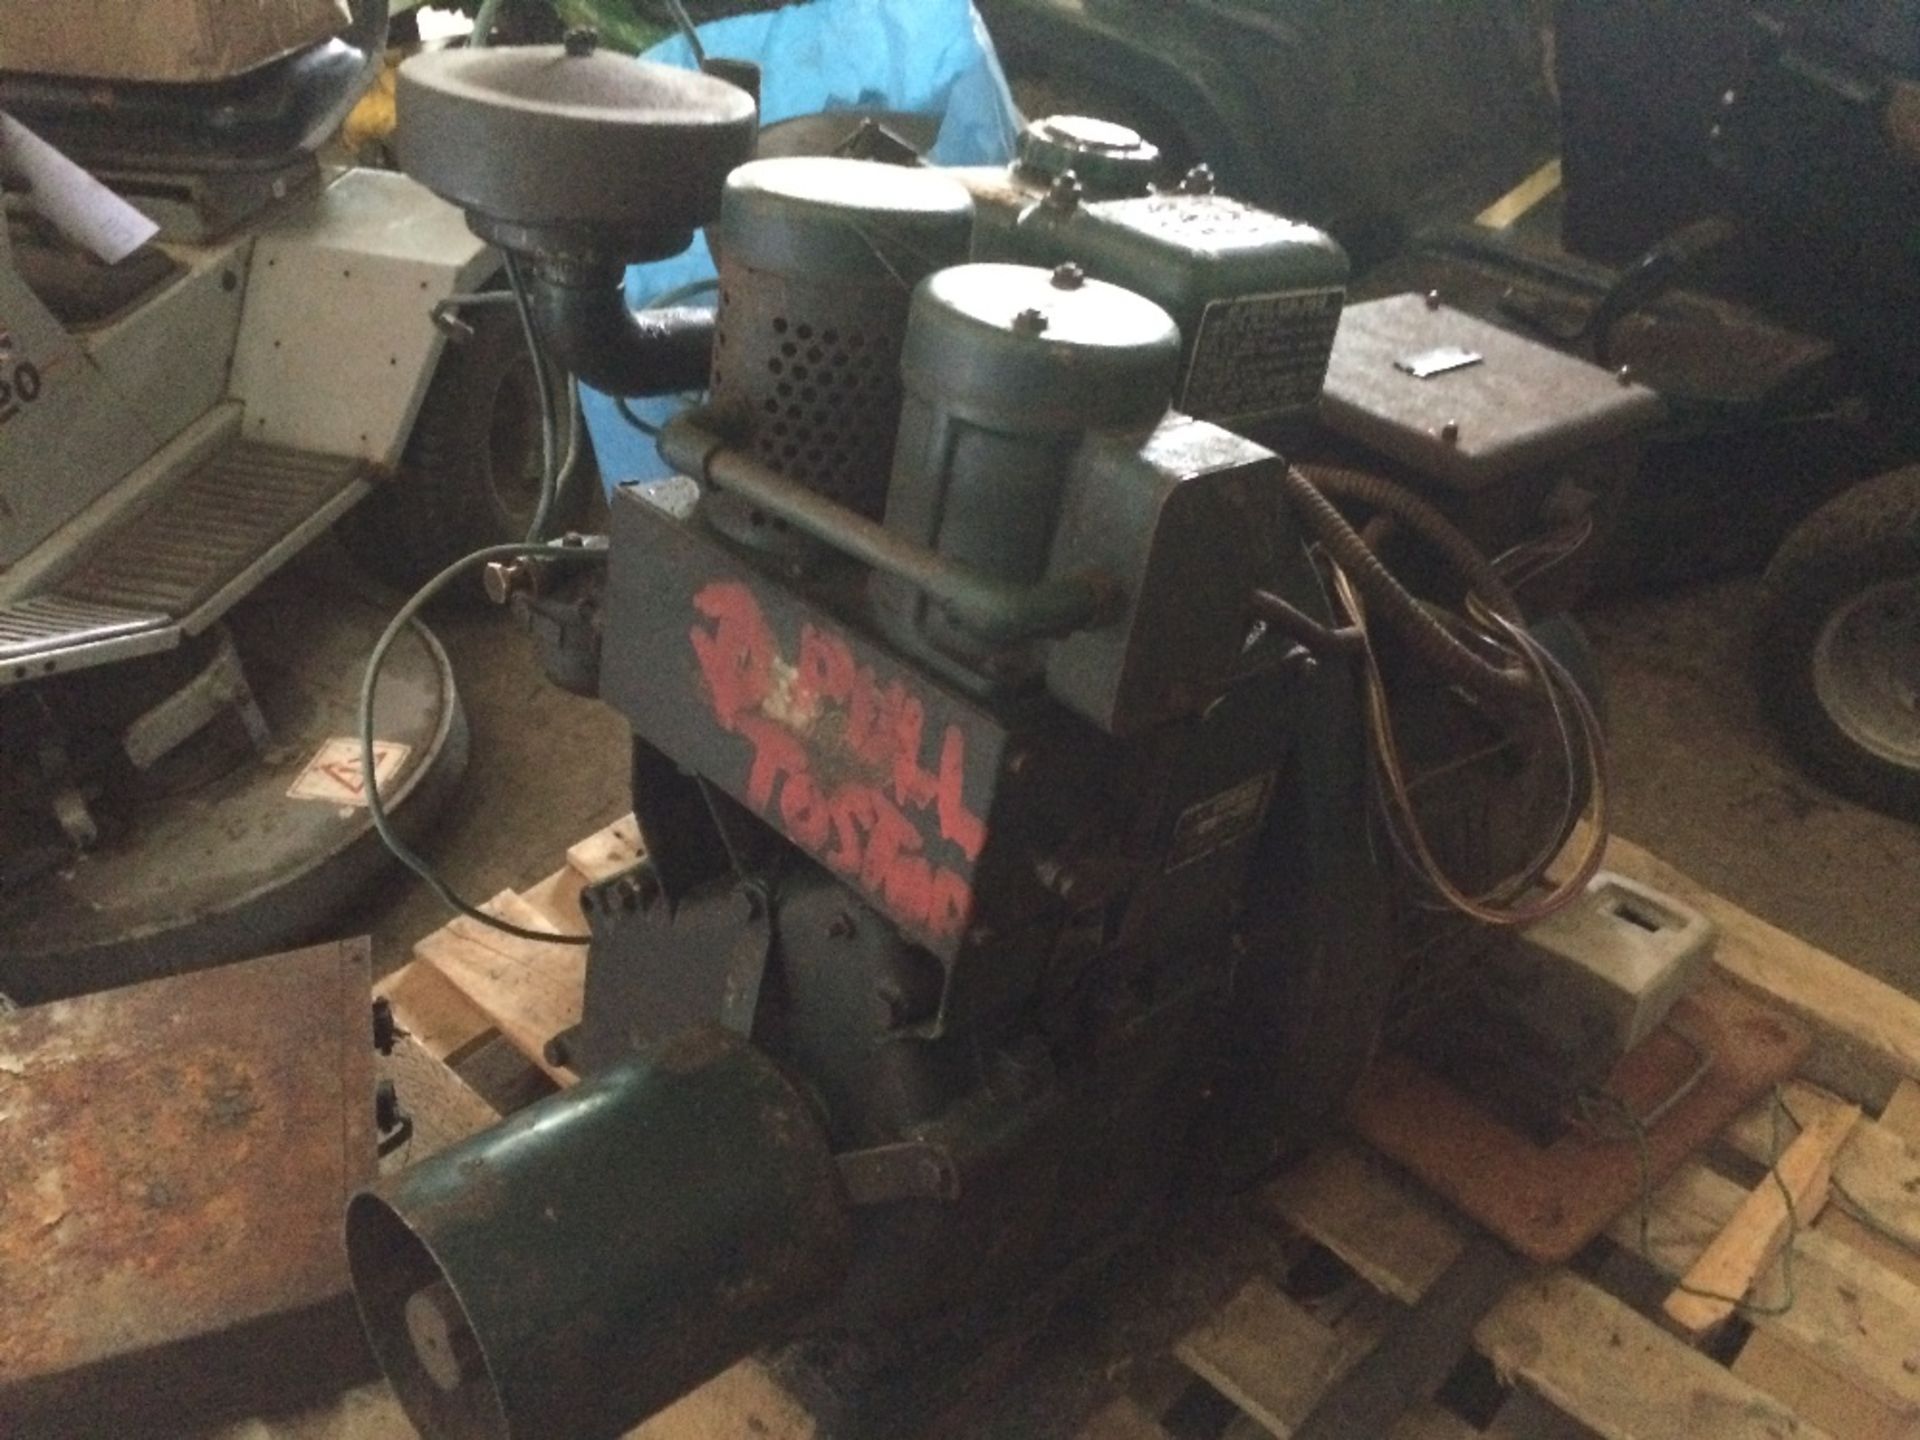 Lister Startomatic generator, air cooled, 3hp, 1500rpm, 1. - Image 8 of 8